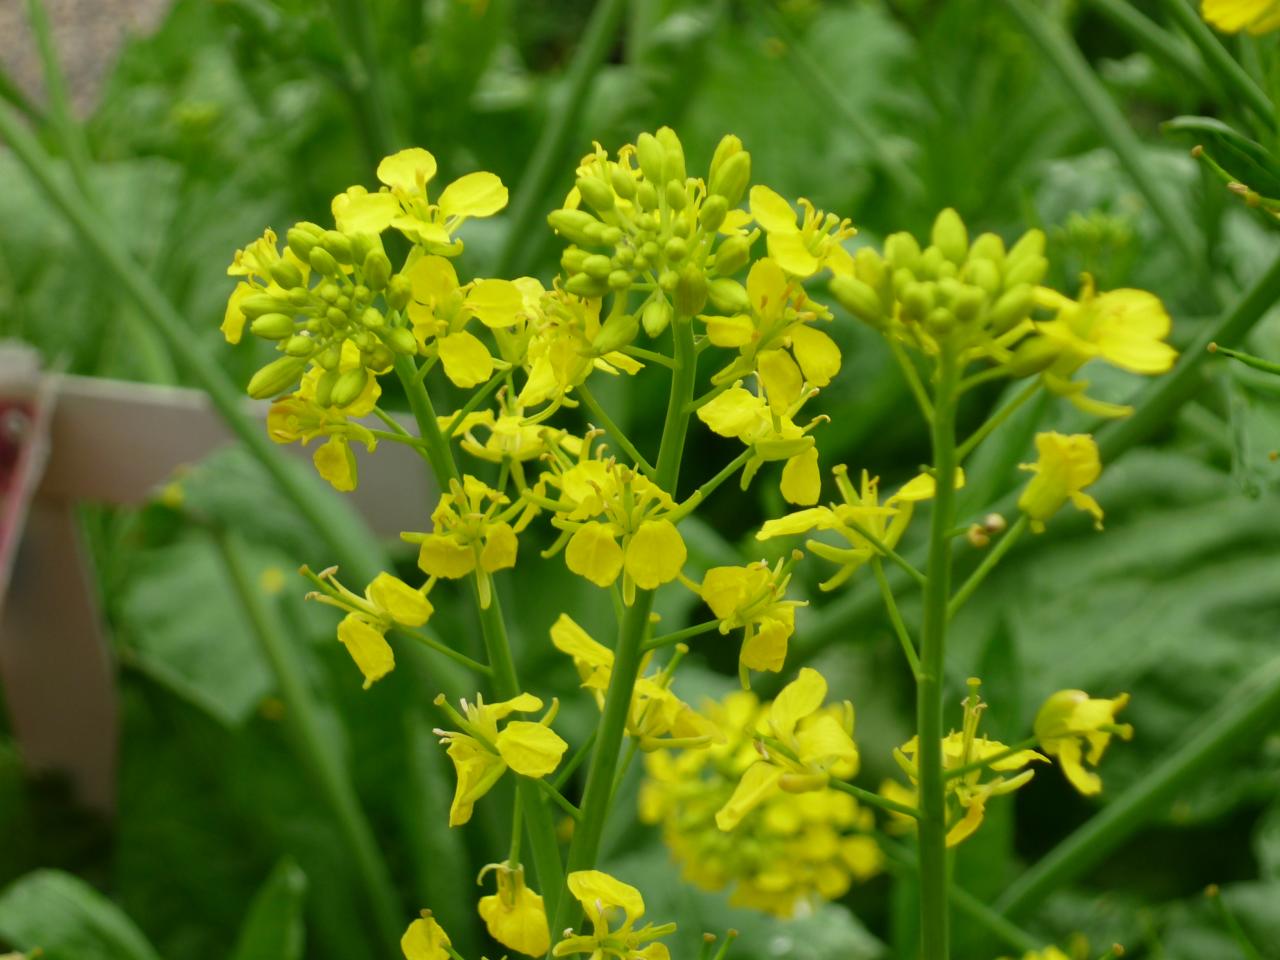 the plant is full of yellow flowers and green foliage